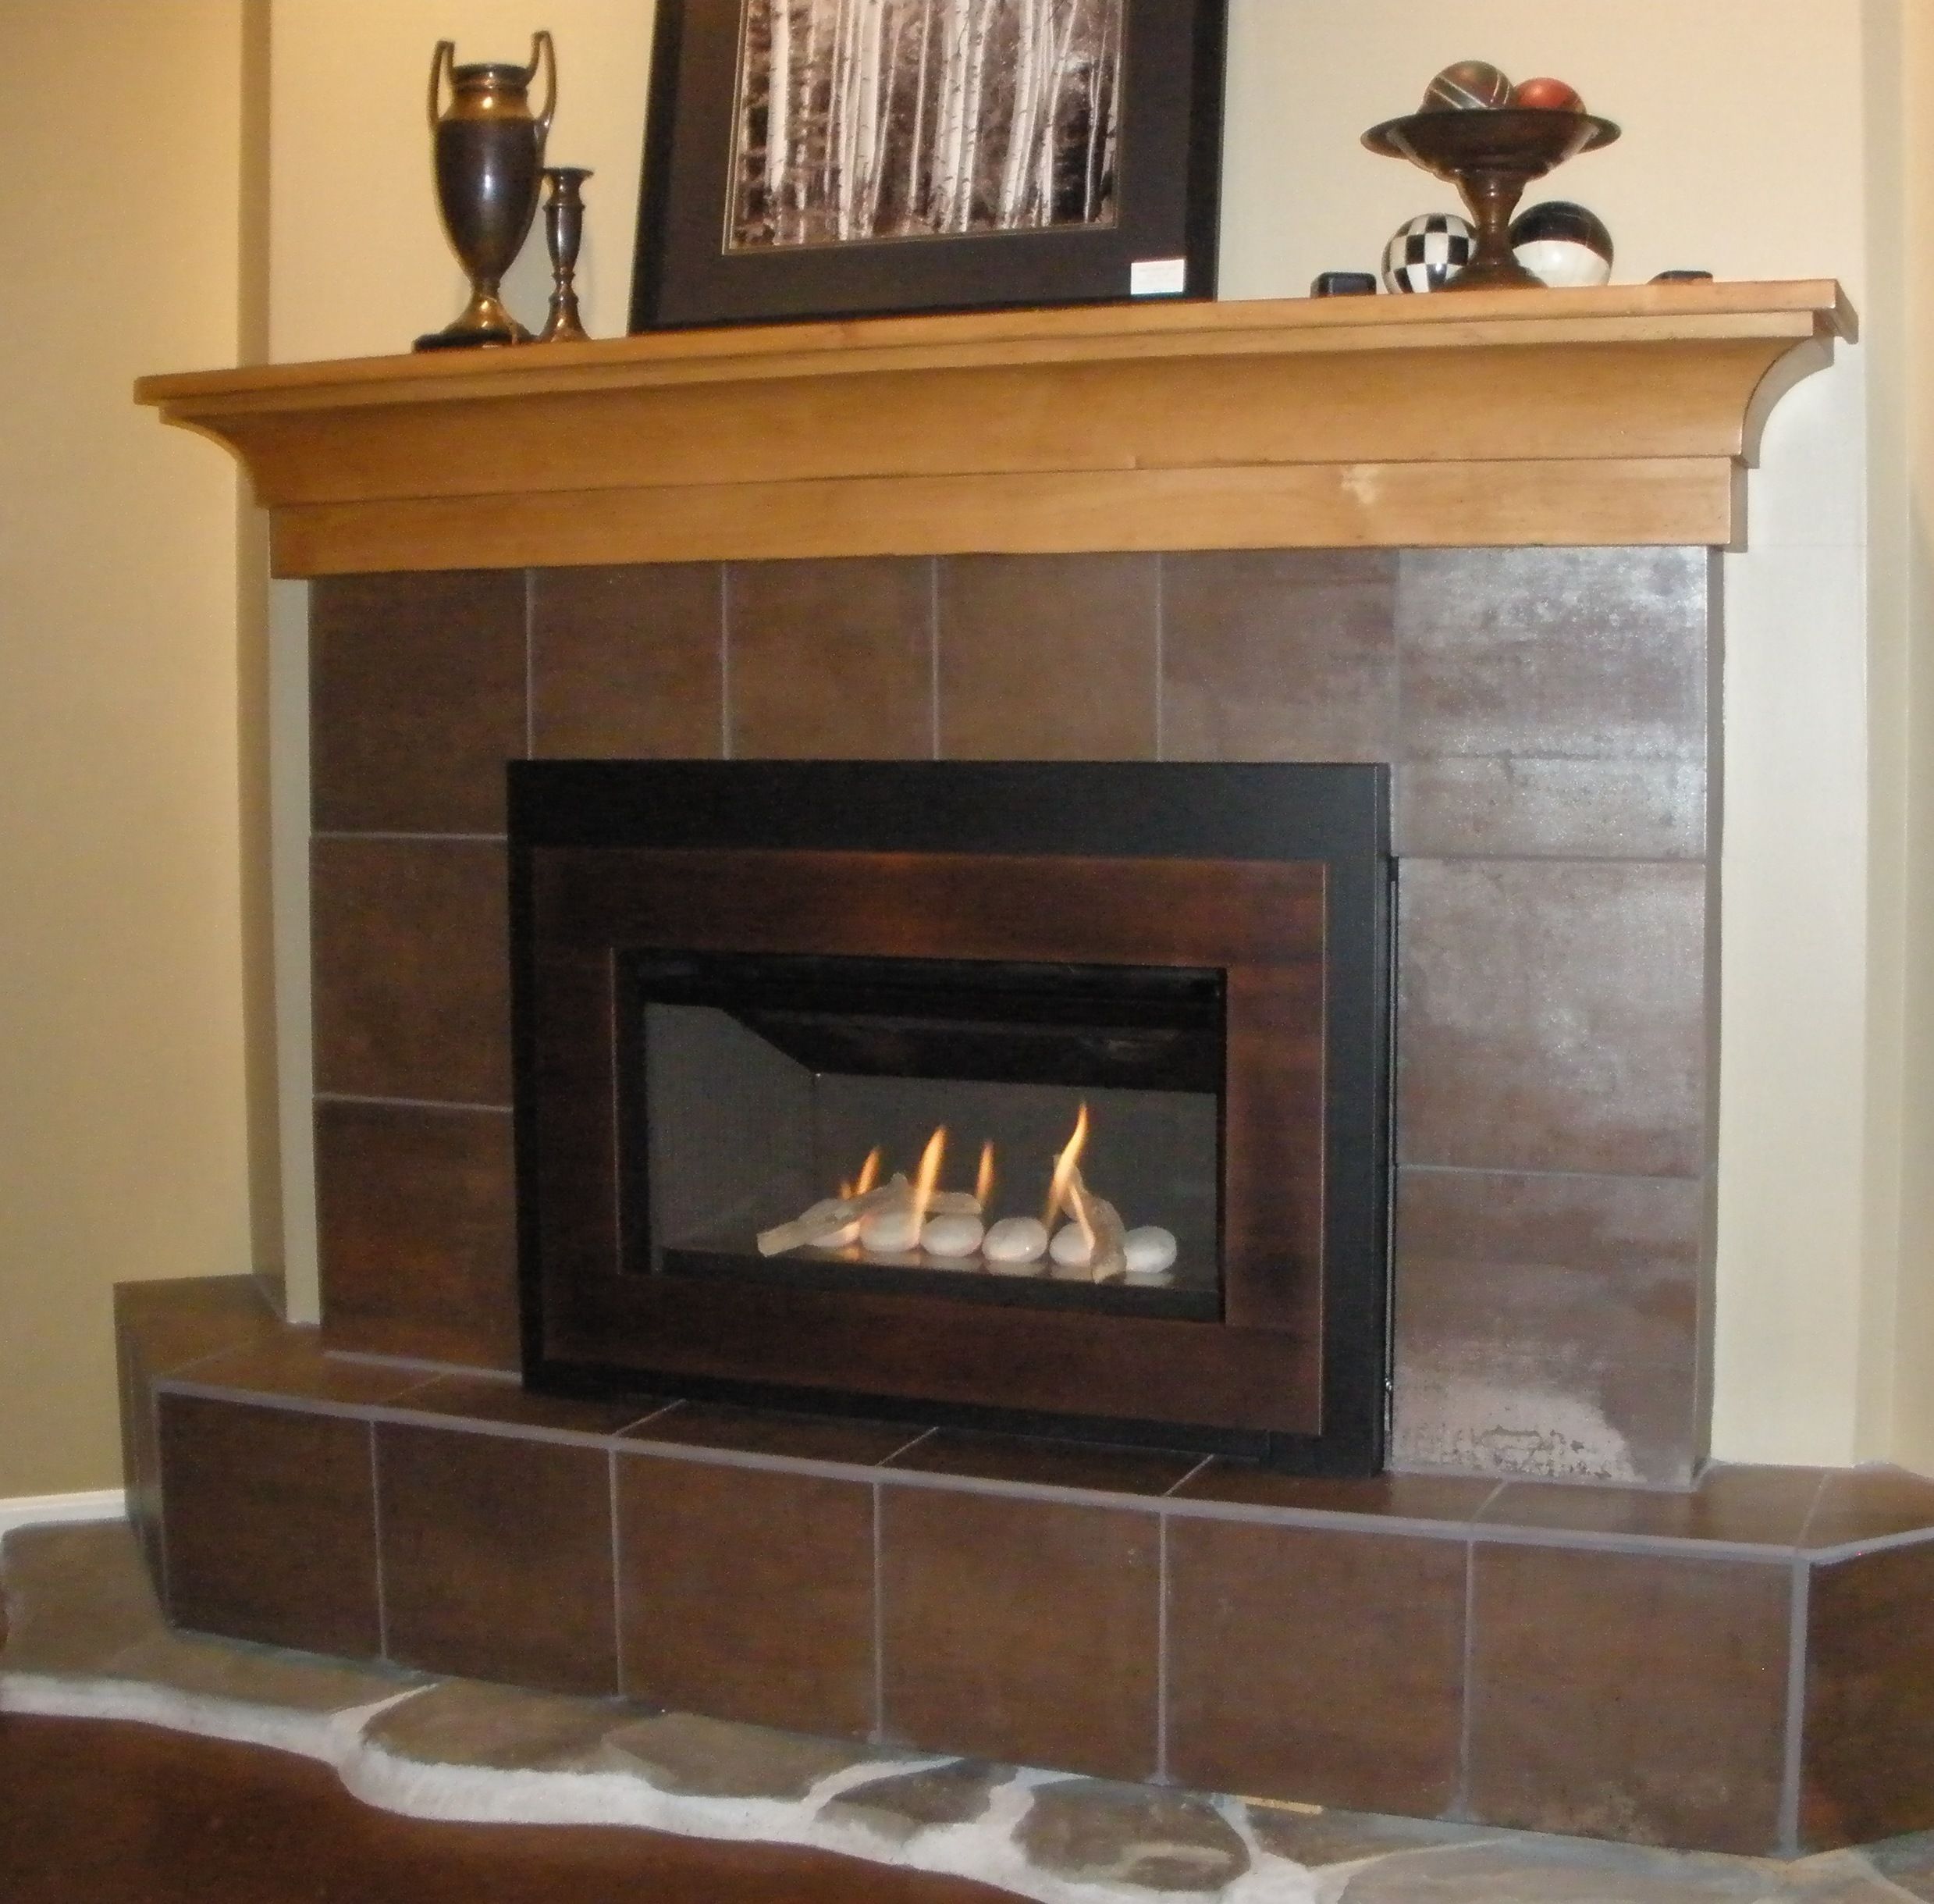 Indoor Natural Gas Fireplace Inspirational Pin On Valor Radiant Gas Fireplaces Midwest Dealer